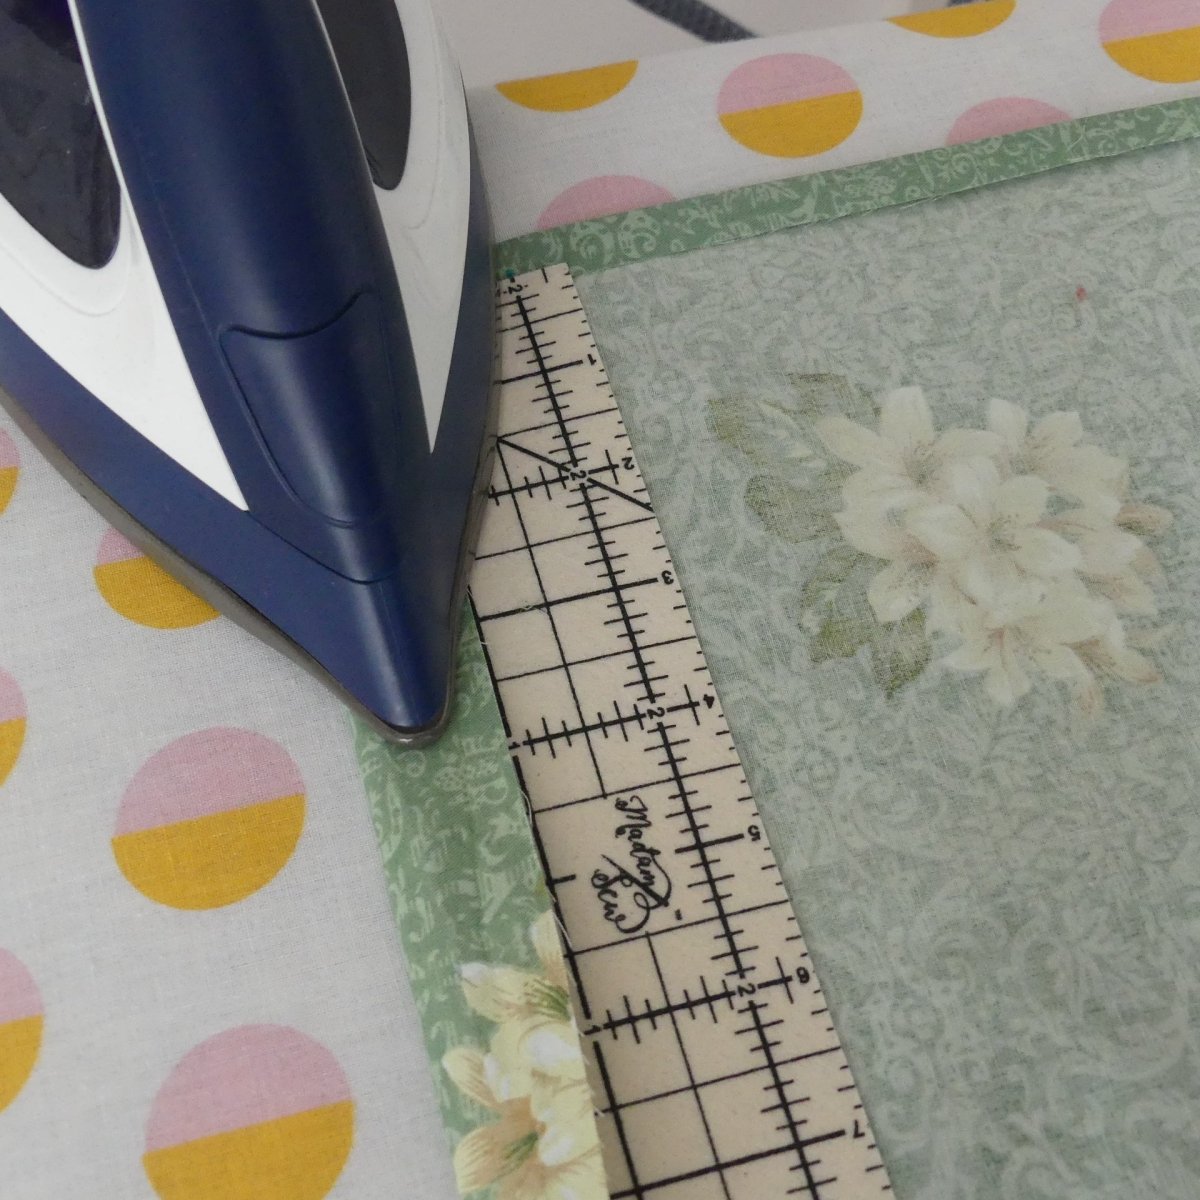 Ironing a wide hem with the Hot Hem Ruler